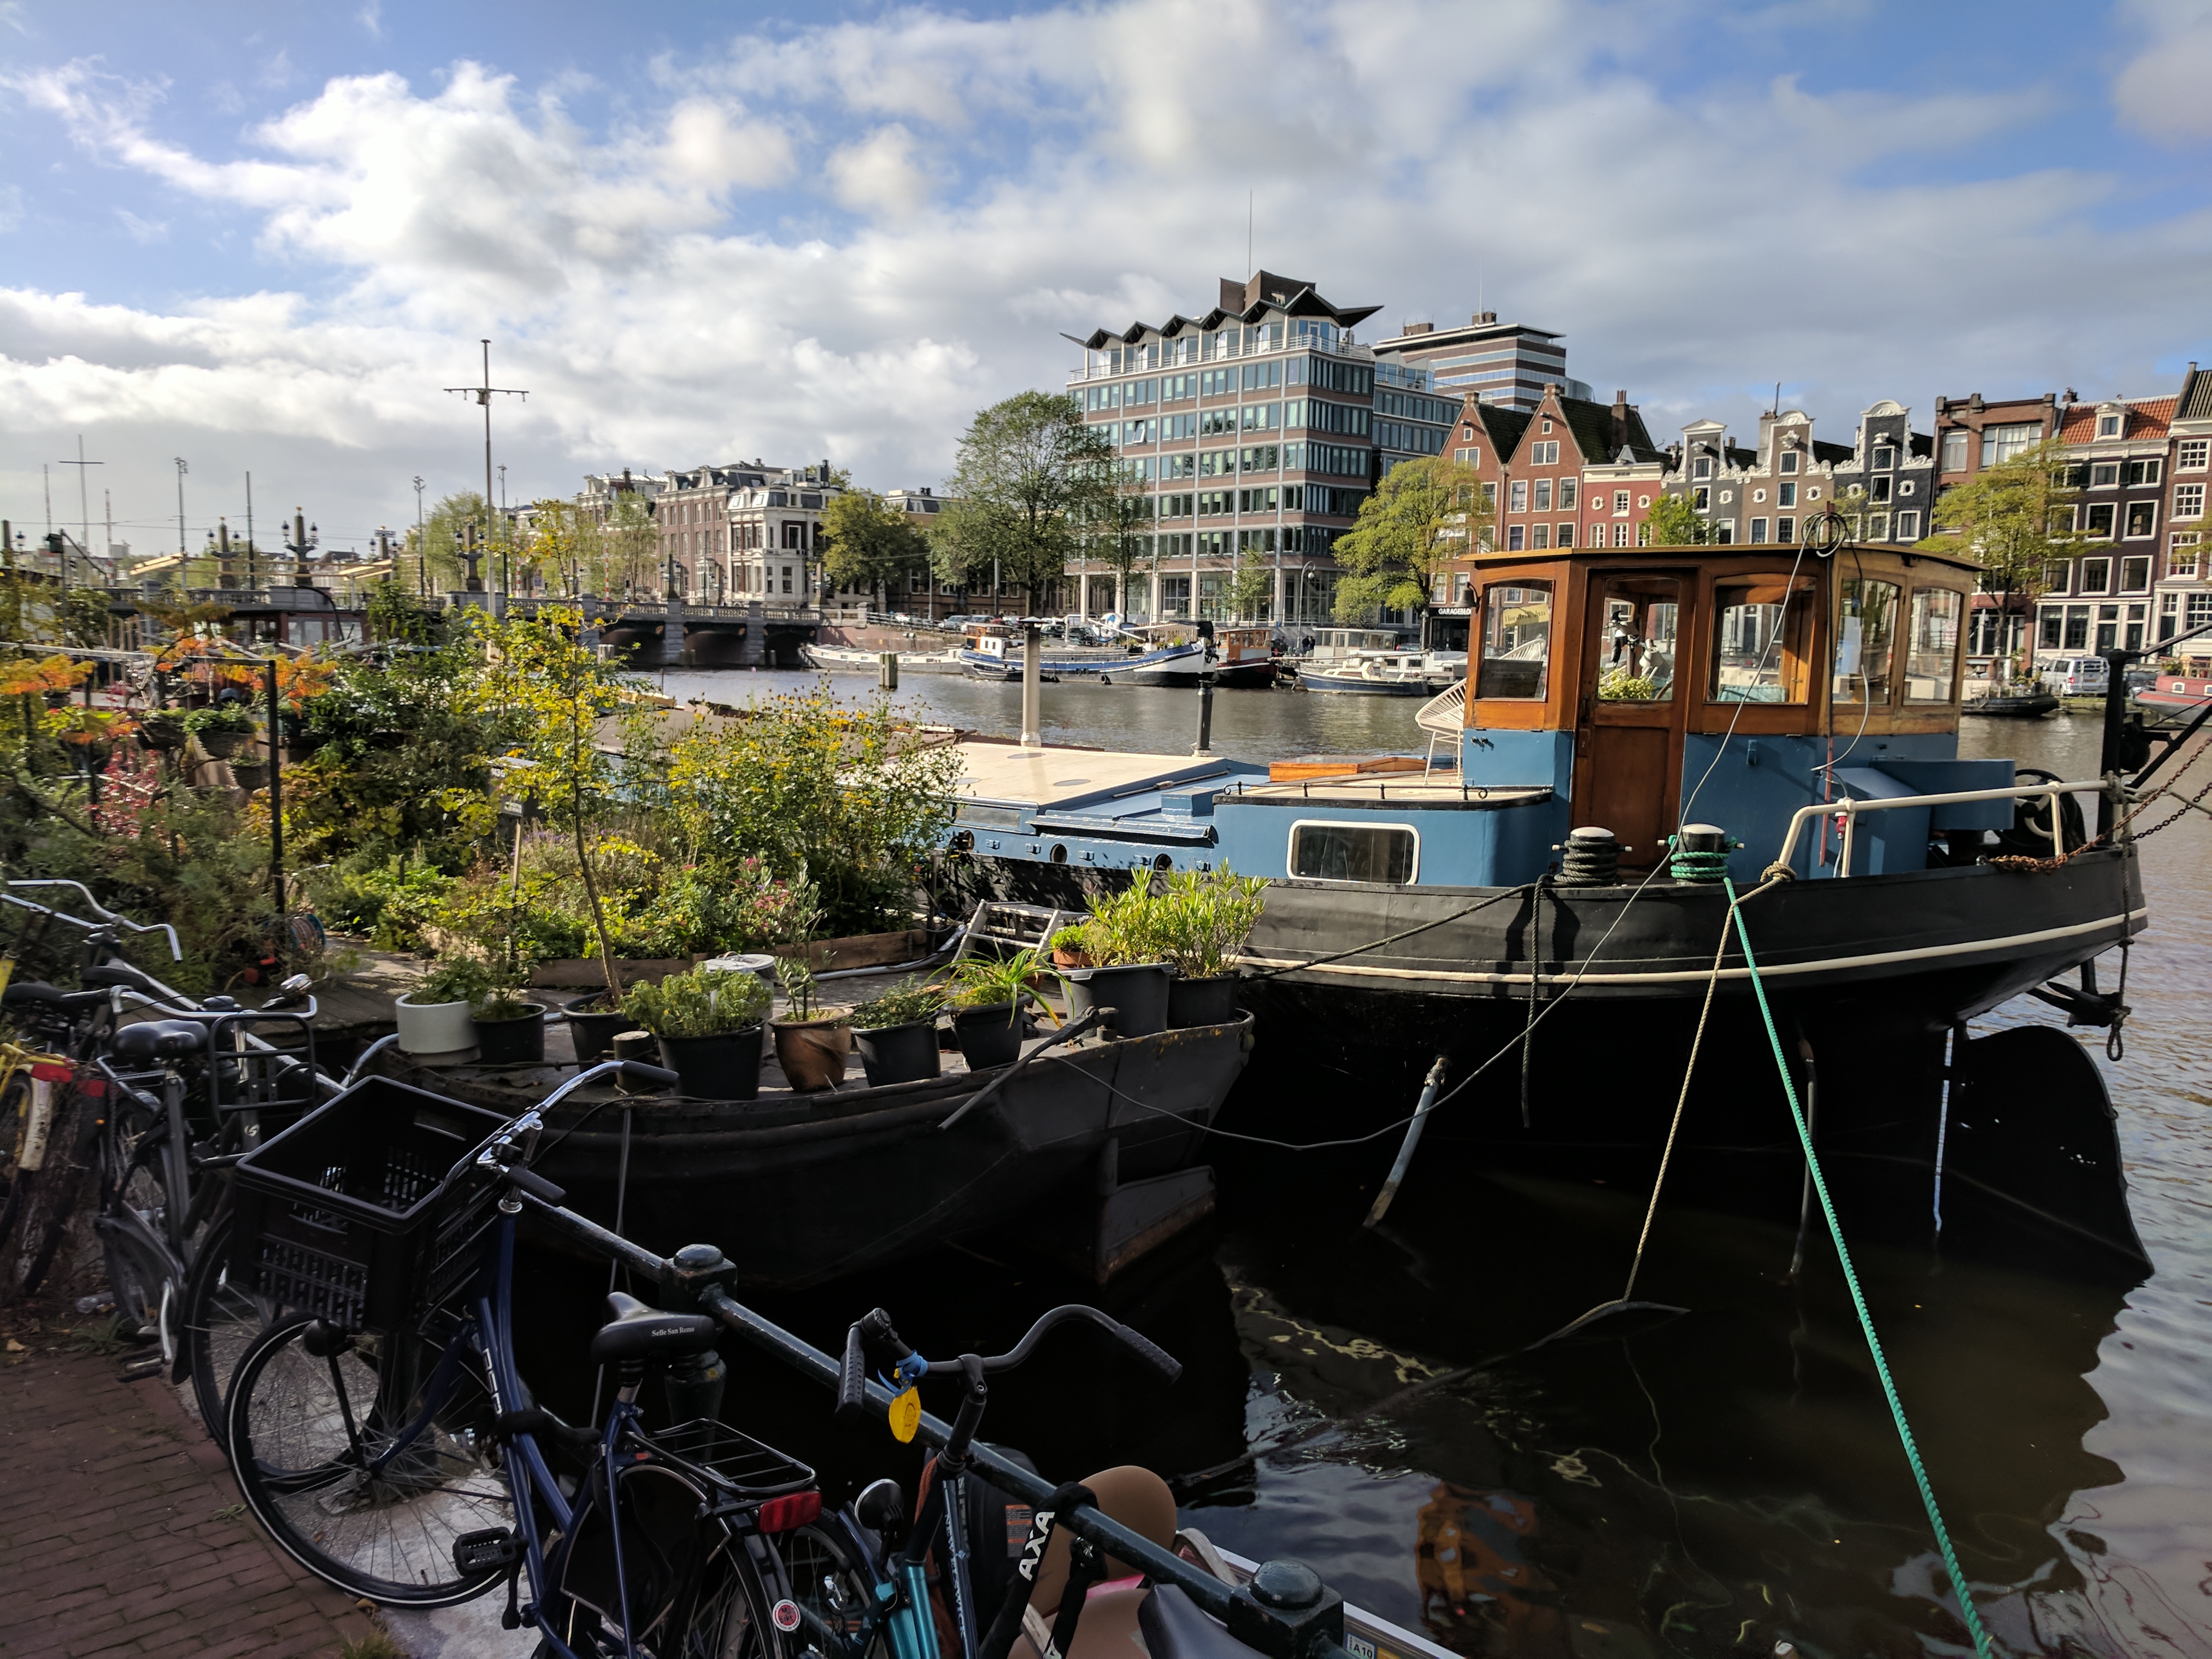 A houseboat with a garden moored along the River Amstel.